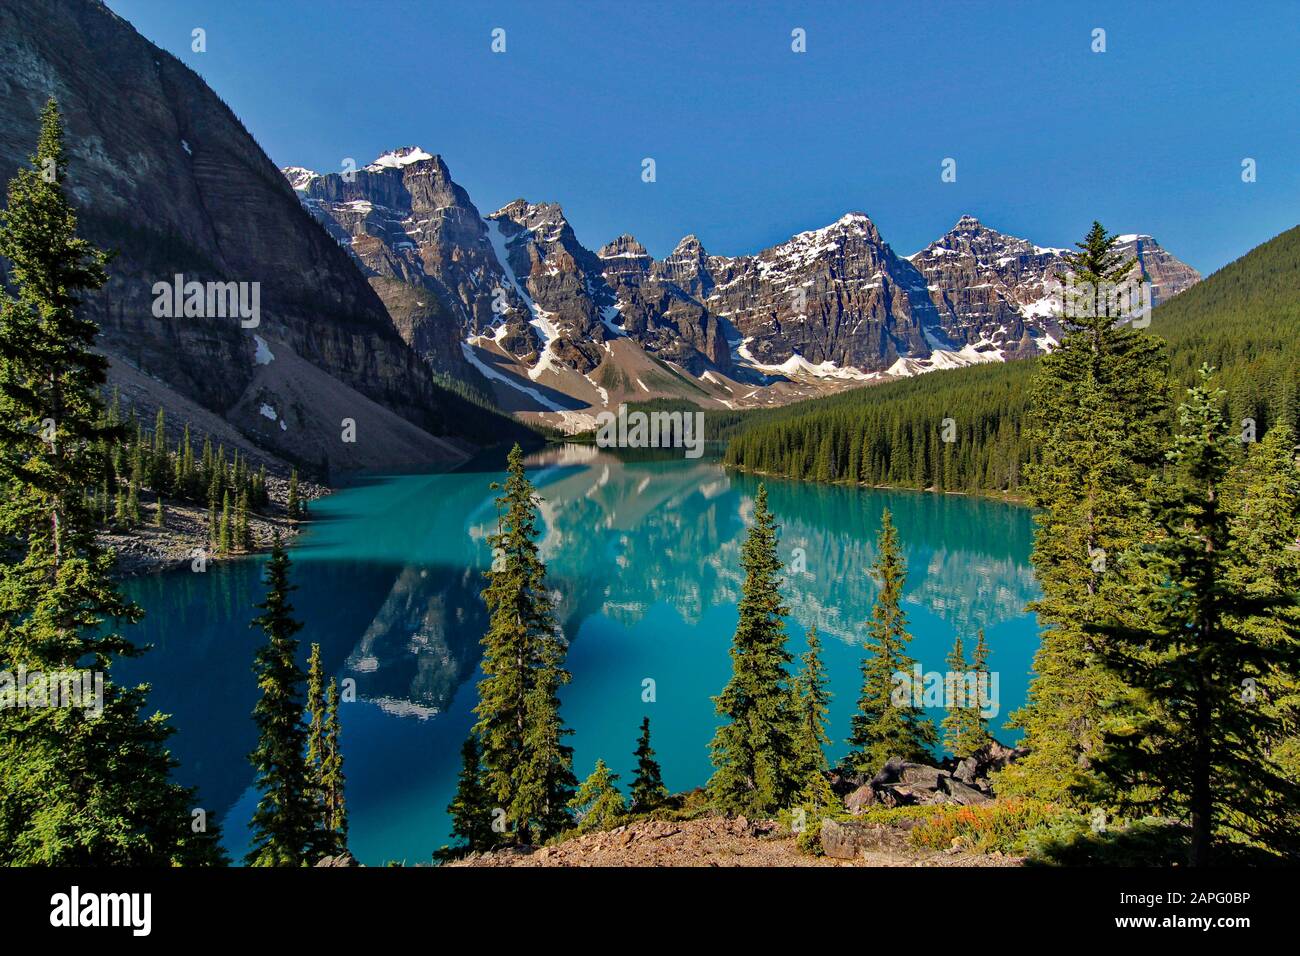 Moraine Lake, Valley Of The Ten Peaks, Banff National Park, Rocky Mountains, Alberta, Canada Foto Stock